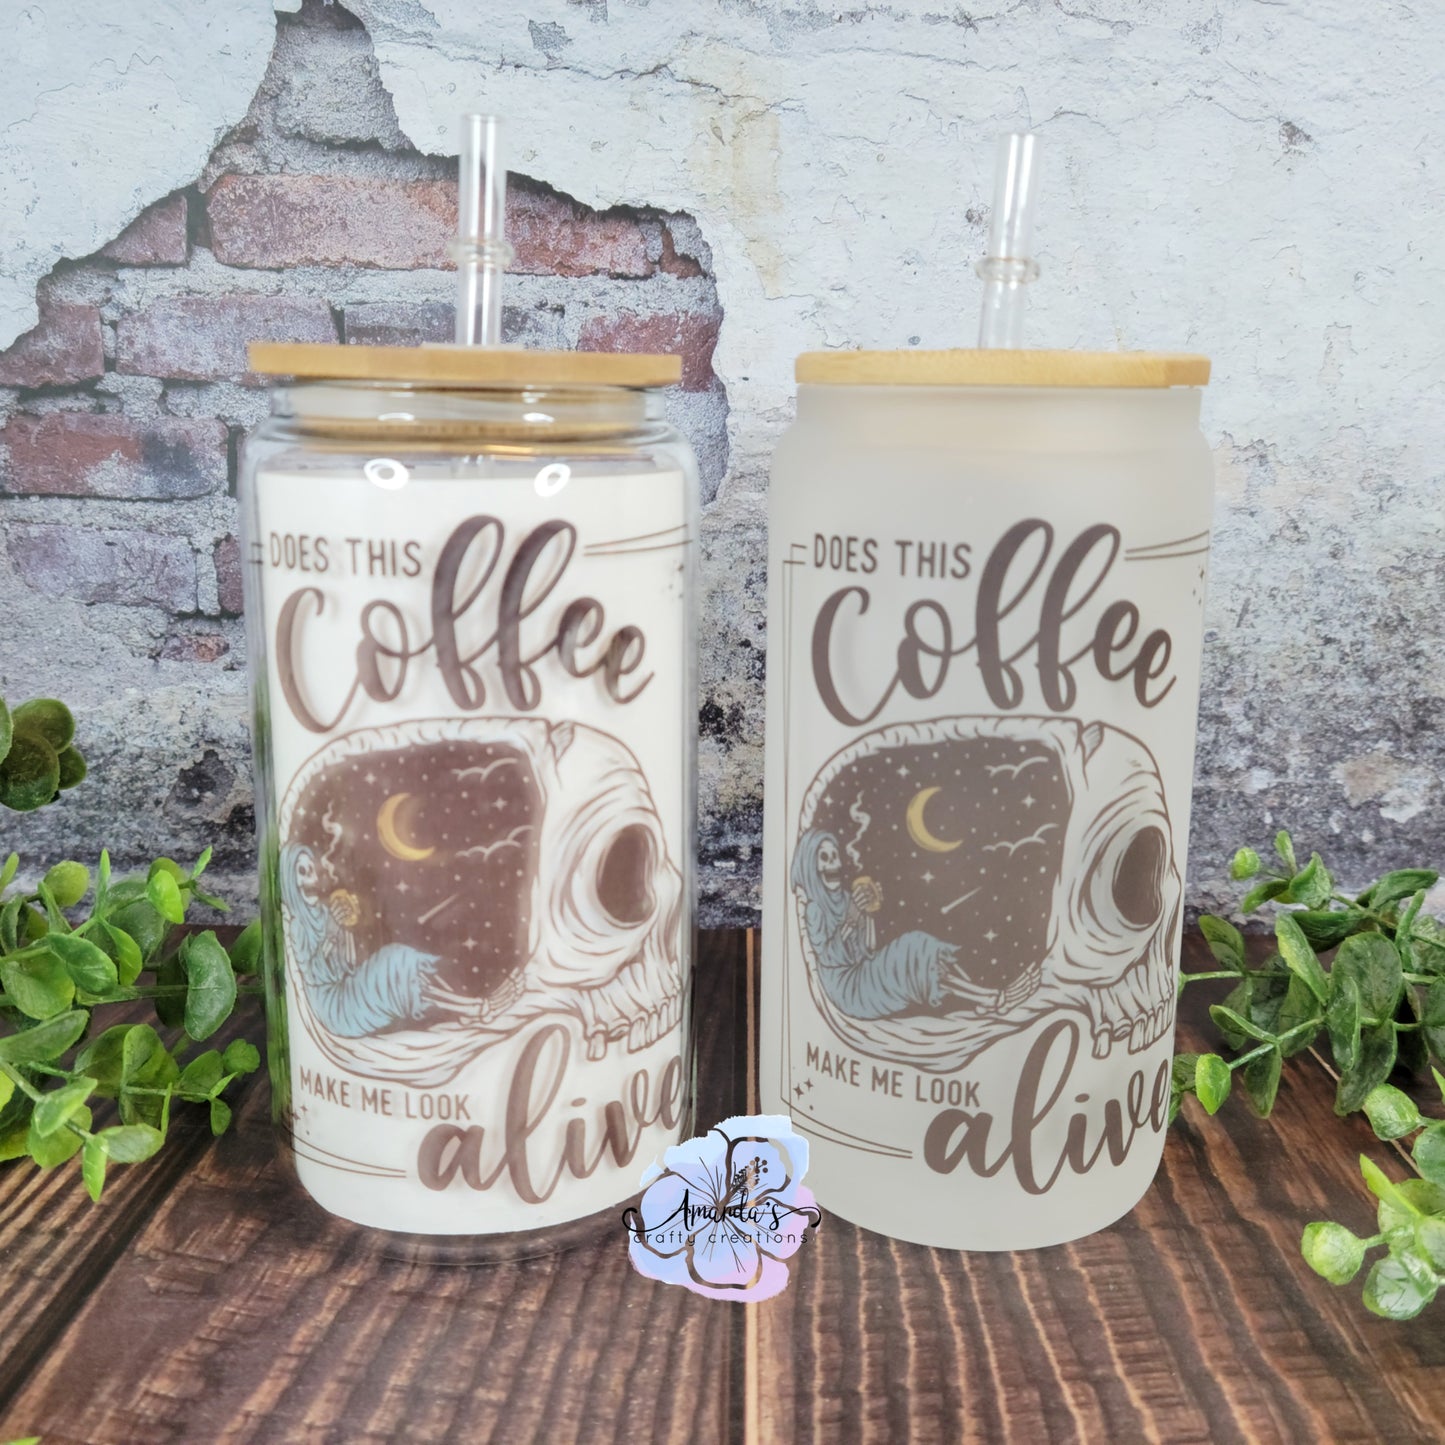 "Does this Coffee Make me Look Alive?" 16 oz glass can cup, beer can cup, clear or frosted, glass can beer cup with bamboo lid and plastic straw